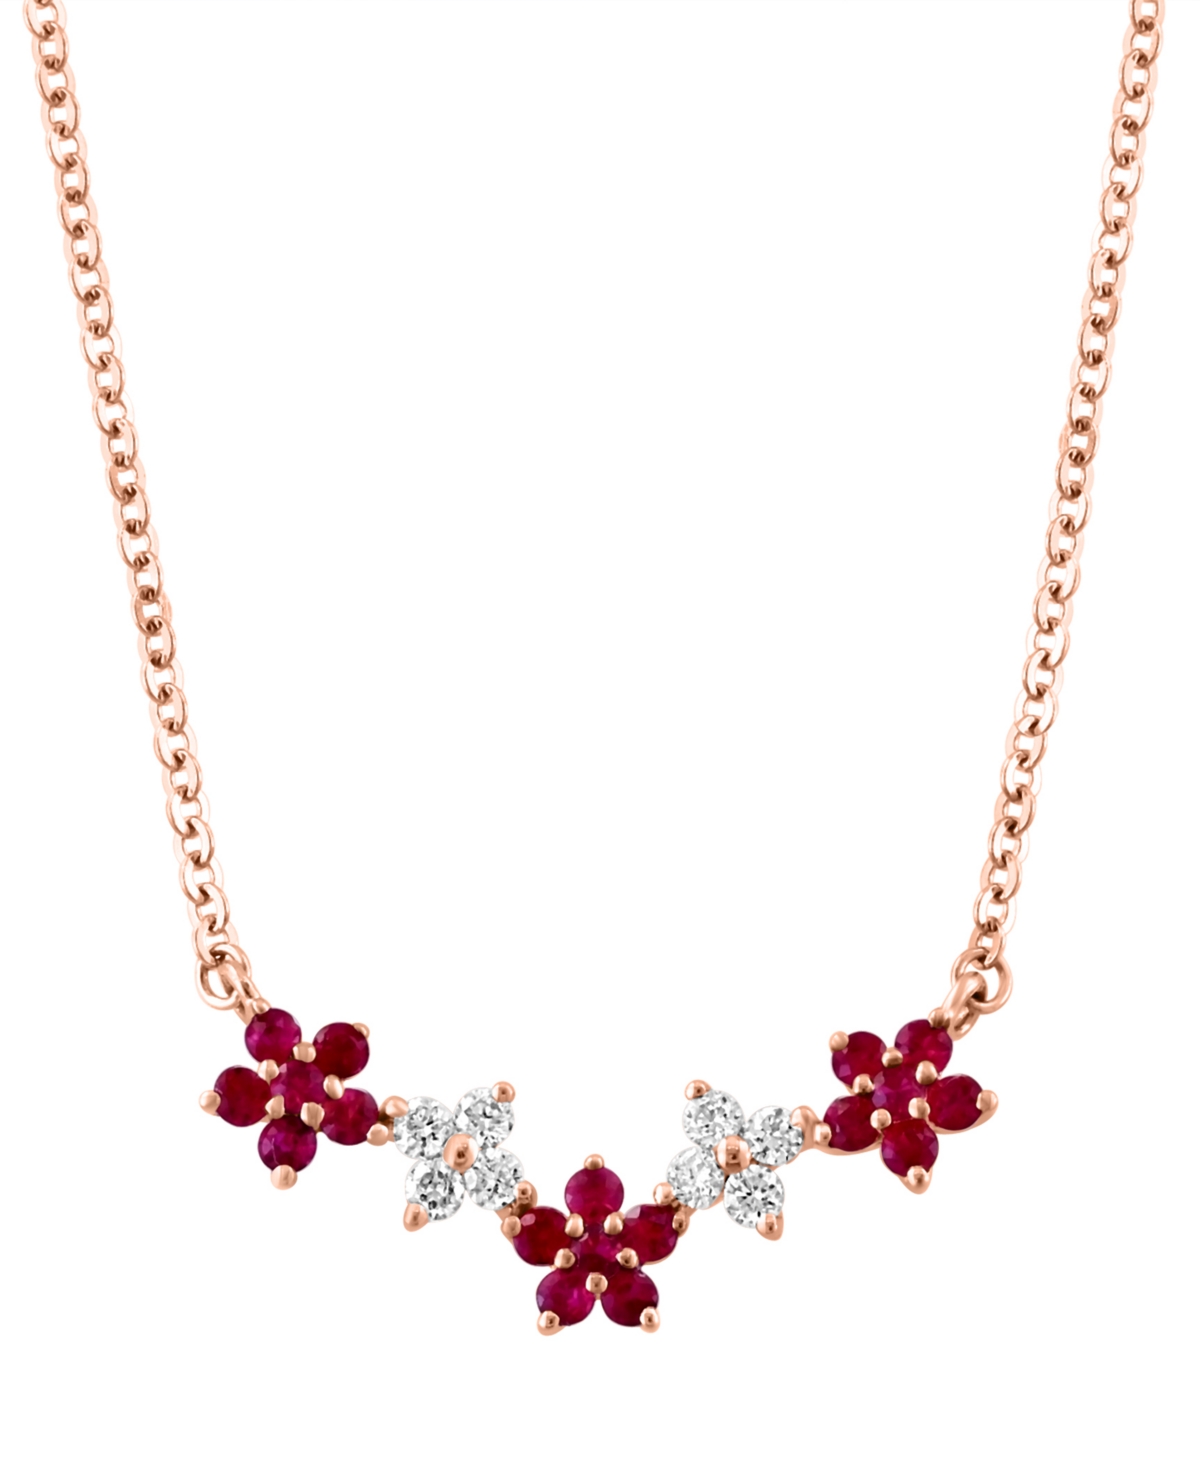 Lali Jewels Ruby (3/8 ct. t.w.) & Diamond (3/8 ct. t.w.) Flower Collar Necklace in 14k Rose Gold, 16" + 2" extender (Also in Sapphire)